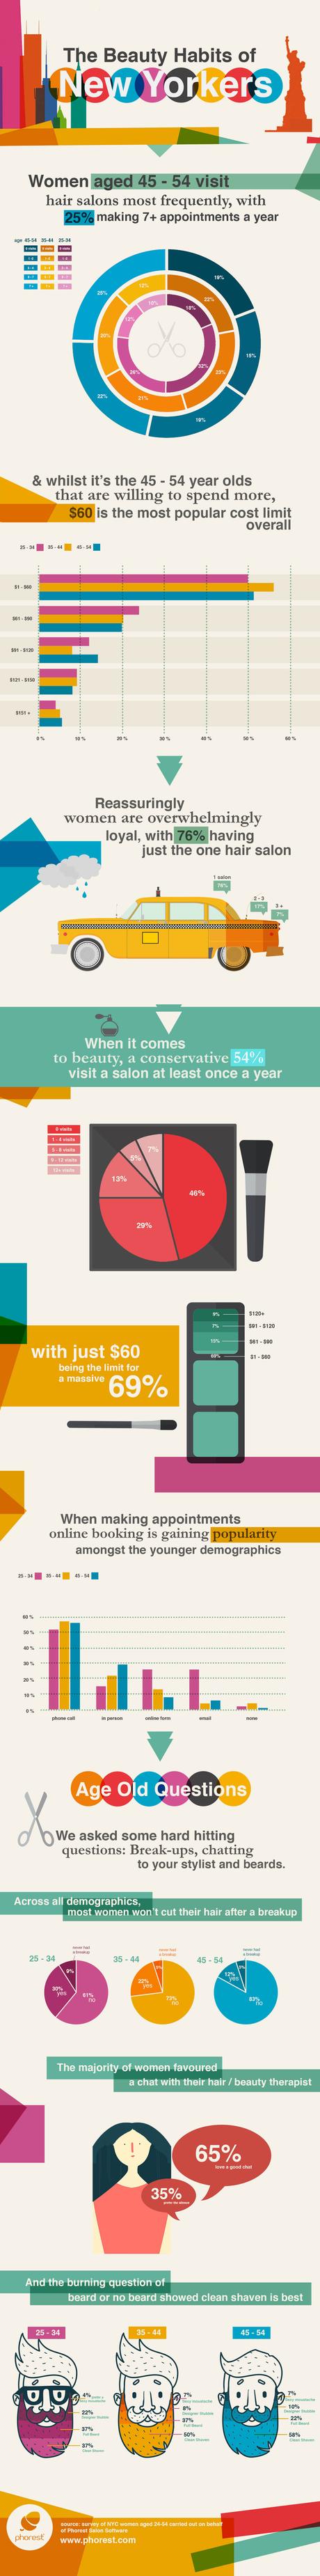 Habits and preferences of NYC Salon Customers Data infographic